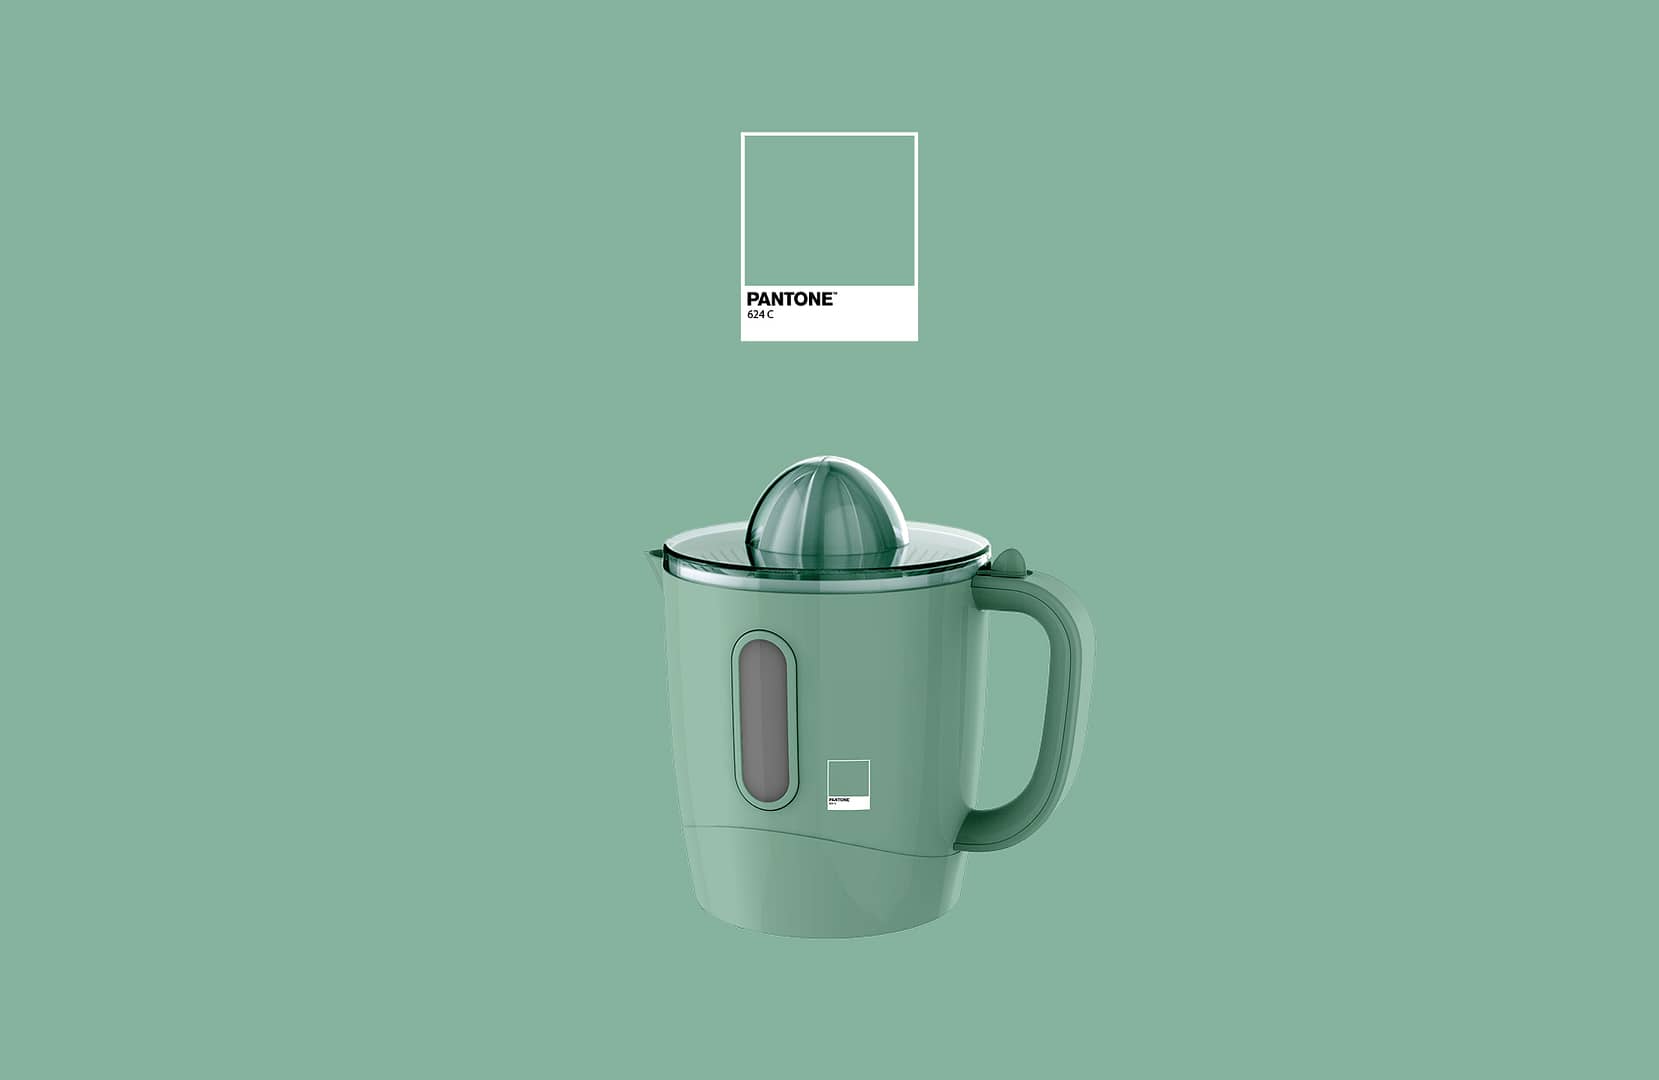 CMF design for the application of new color distributions - green - to small appliances designed by Bimar & Pantone